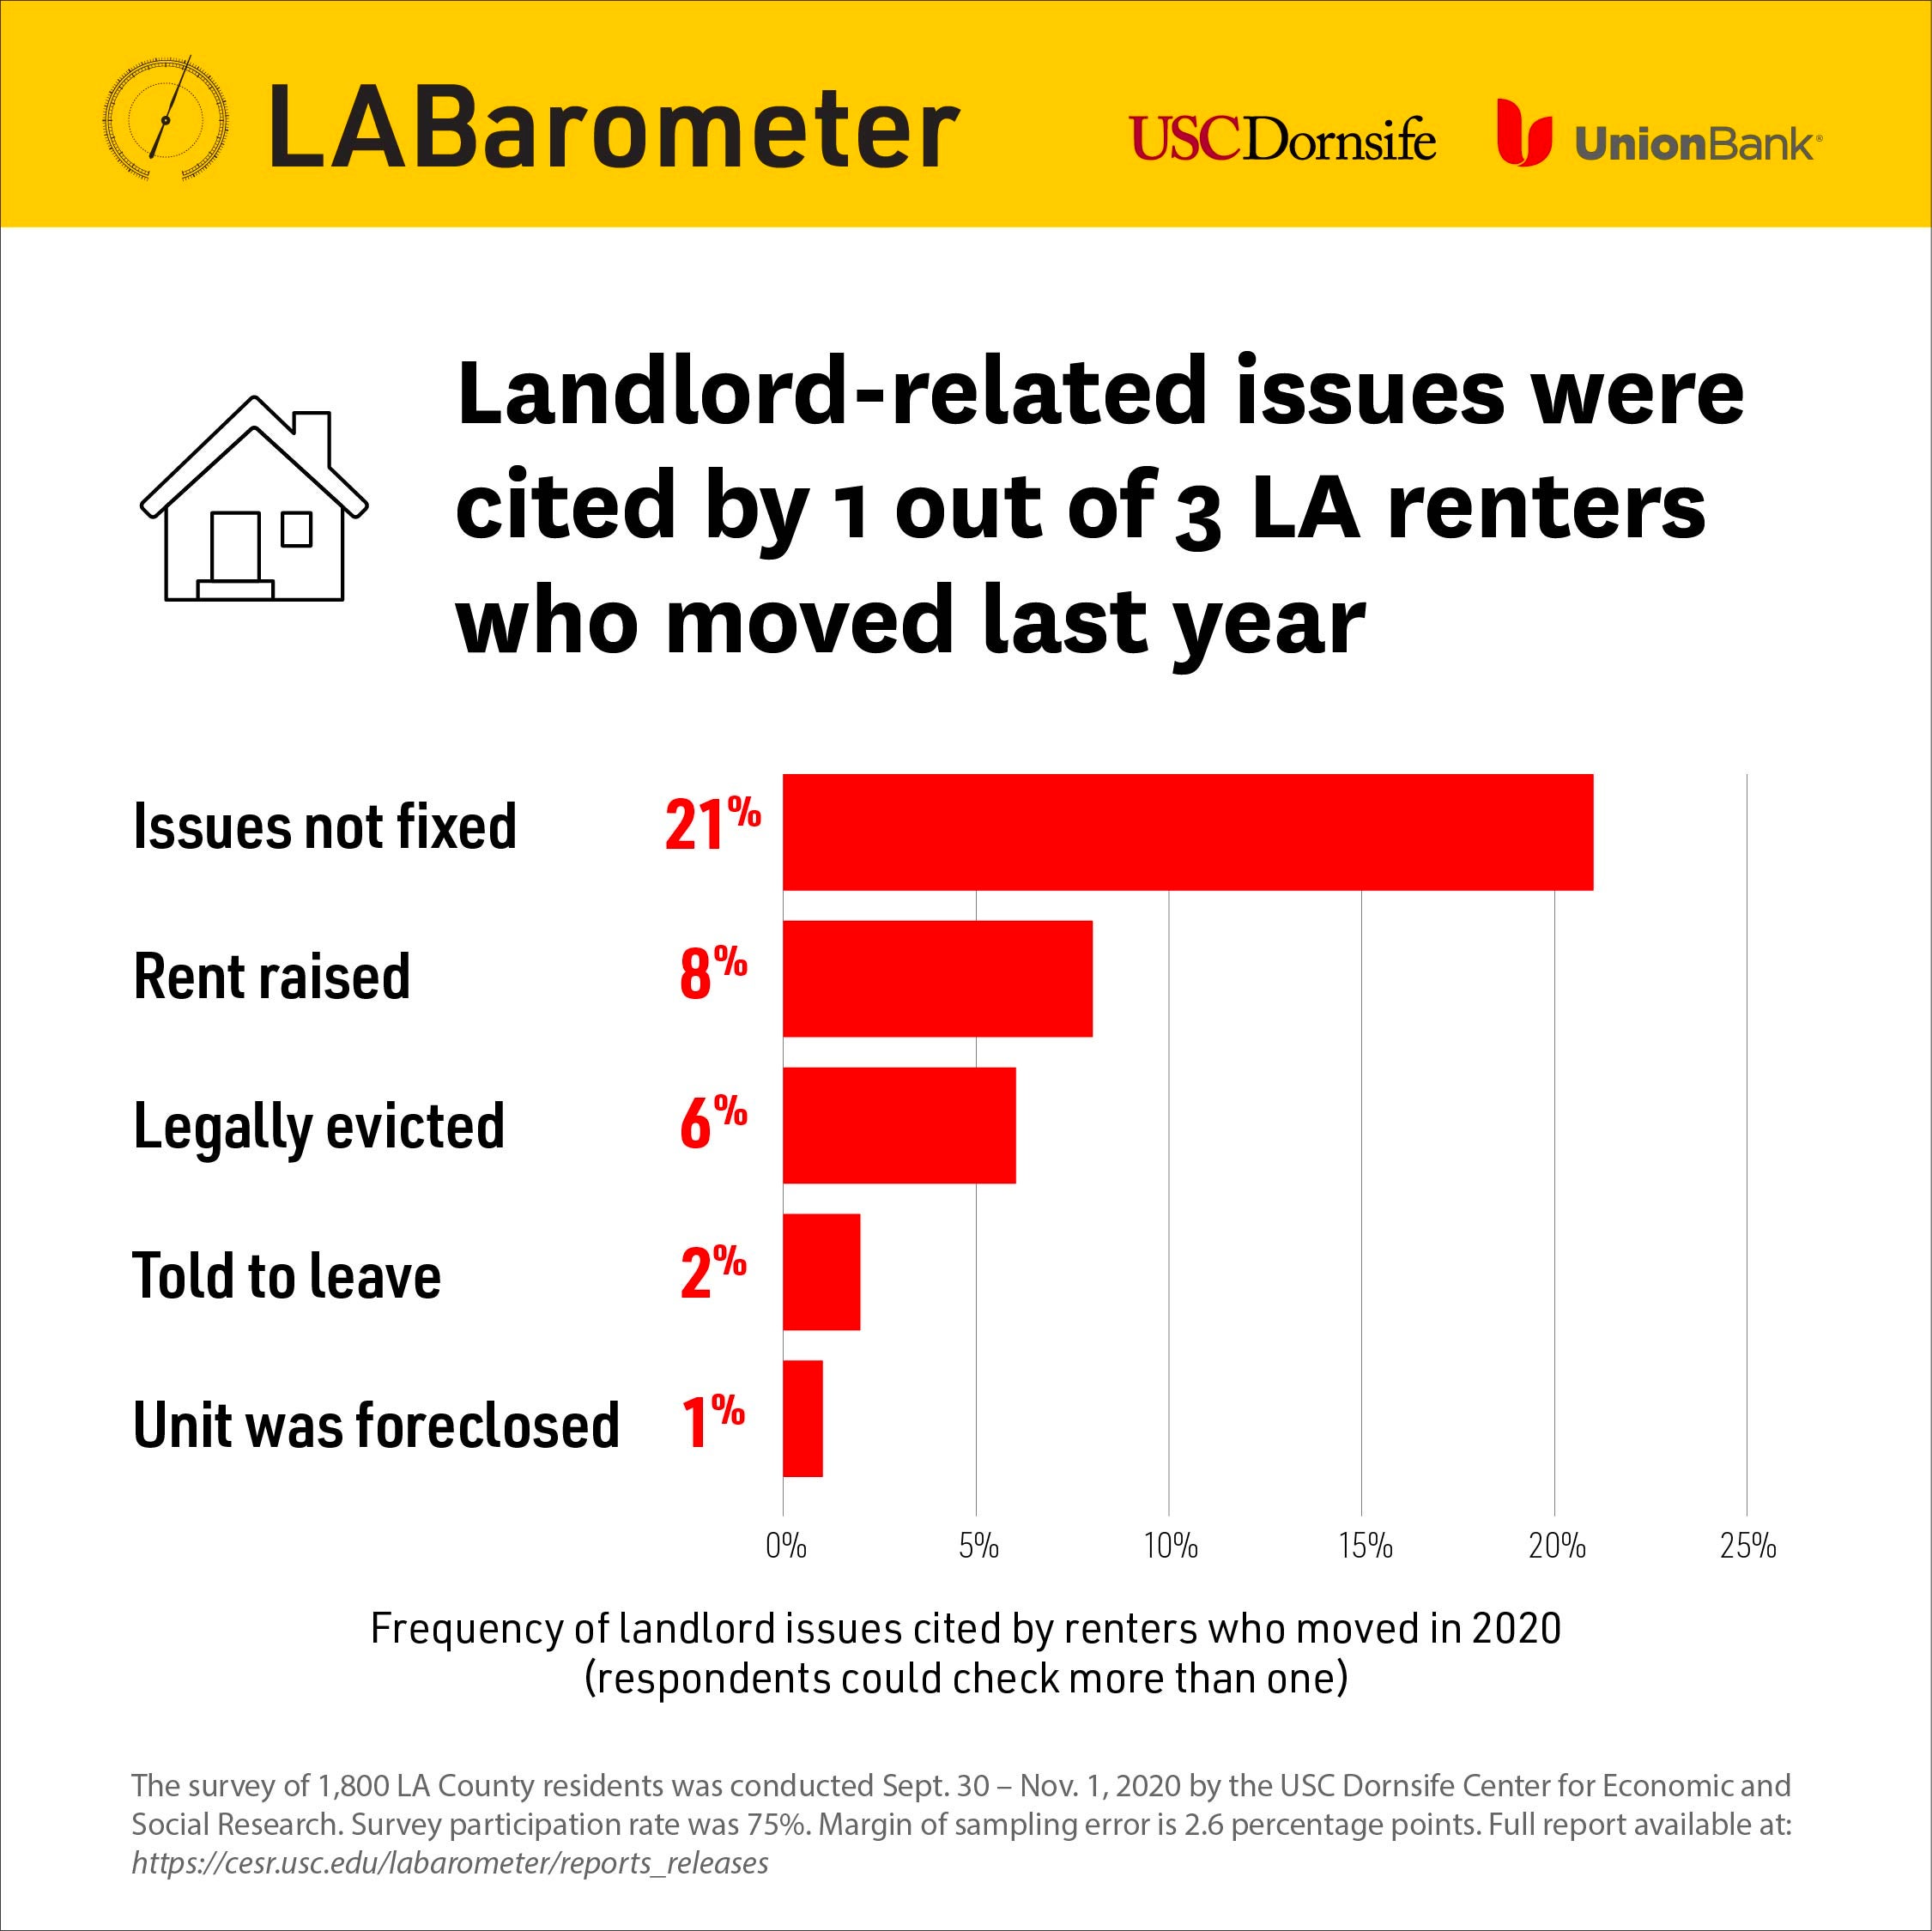 Bar graph shows how frequently renters who moved in 2020 cited the following landlord issues as reasons to leave: problem not fixed (21%), rent raised (8%), legally evicted (6%), told to leave (2%) and unit foreclosed (1%).